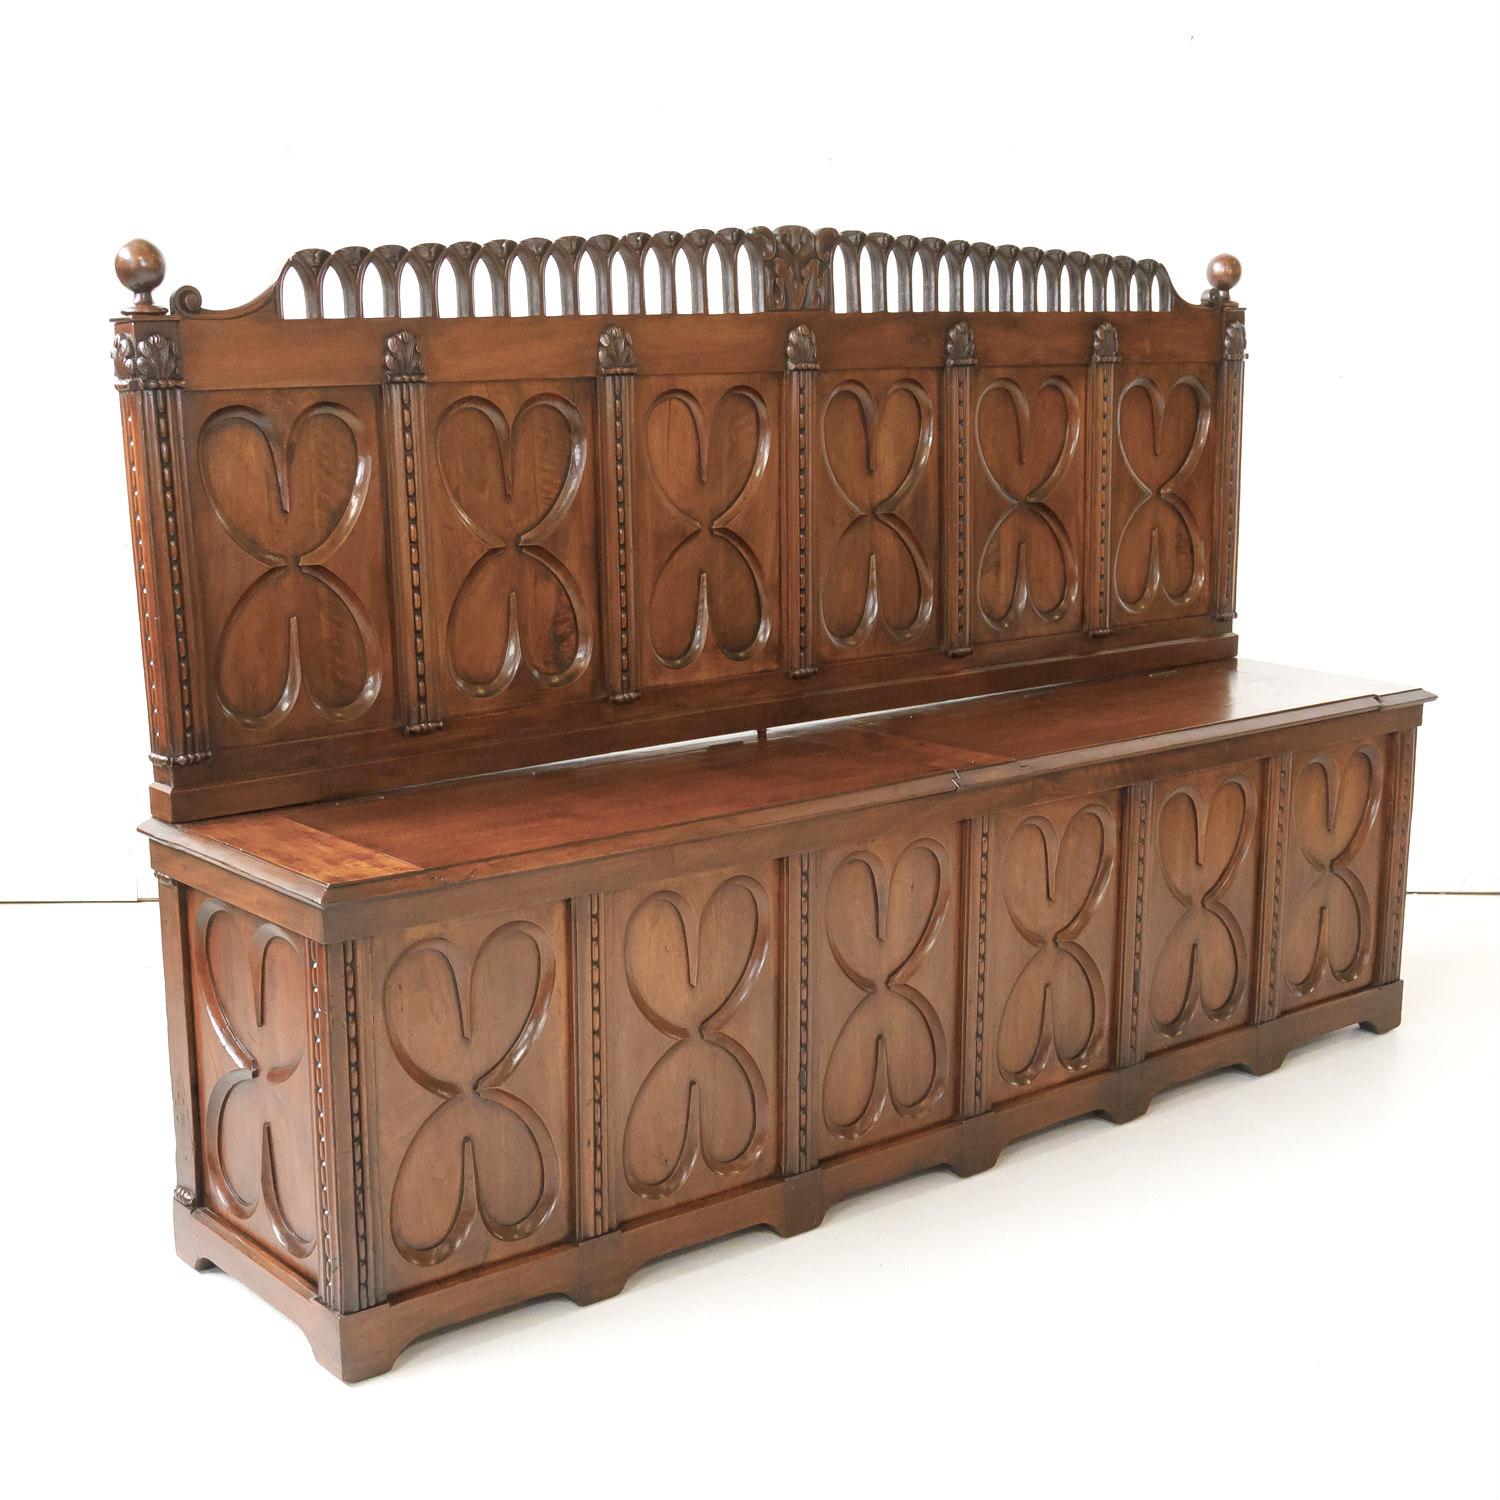 18th Century French Gothic Revival Period Walnut Settle or Hall Bench with Lift  In Good Condition For Sale In Birmingham, AL